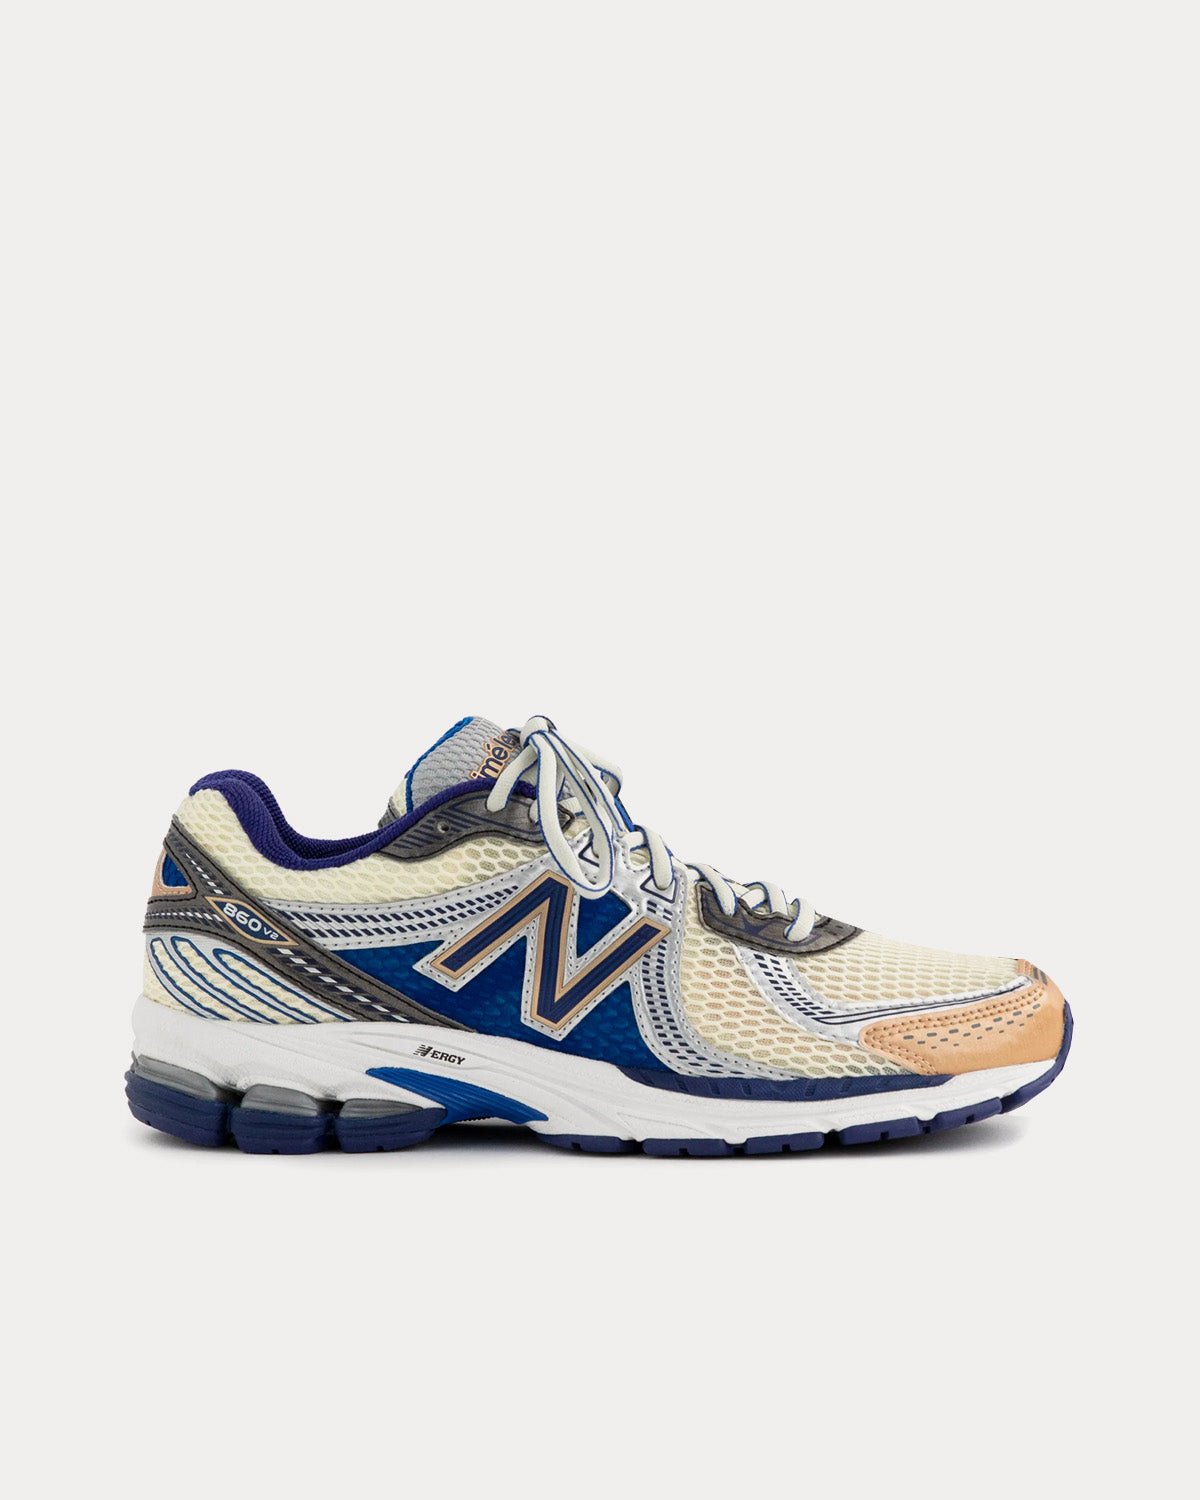 New Balance x Aime Leon Dore - 860v2 Blue Low Top Sneakers